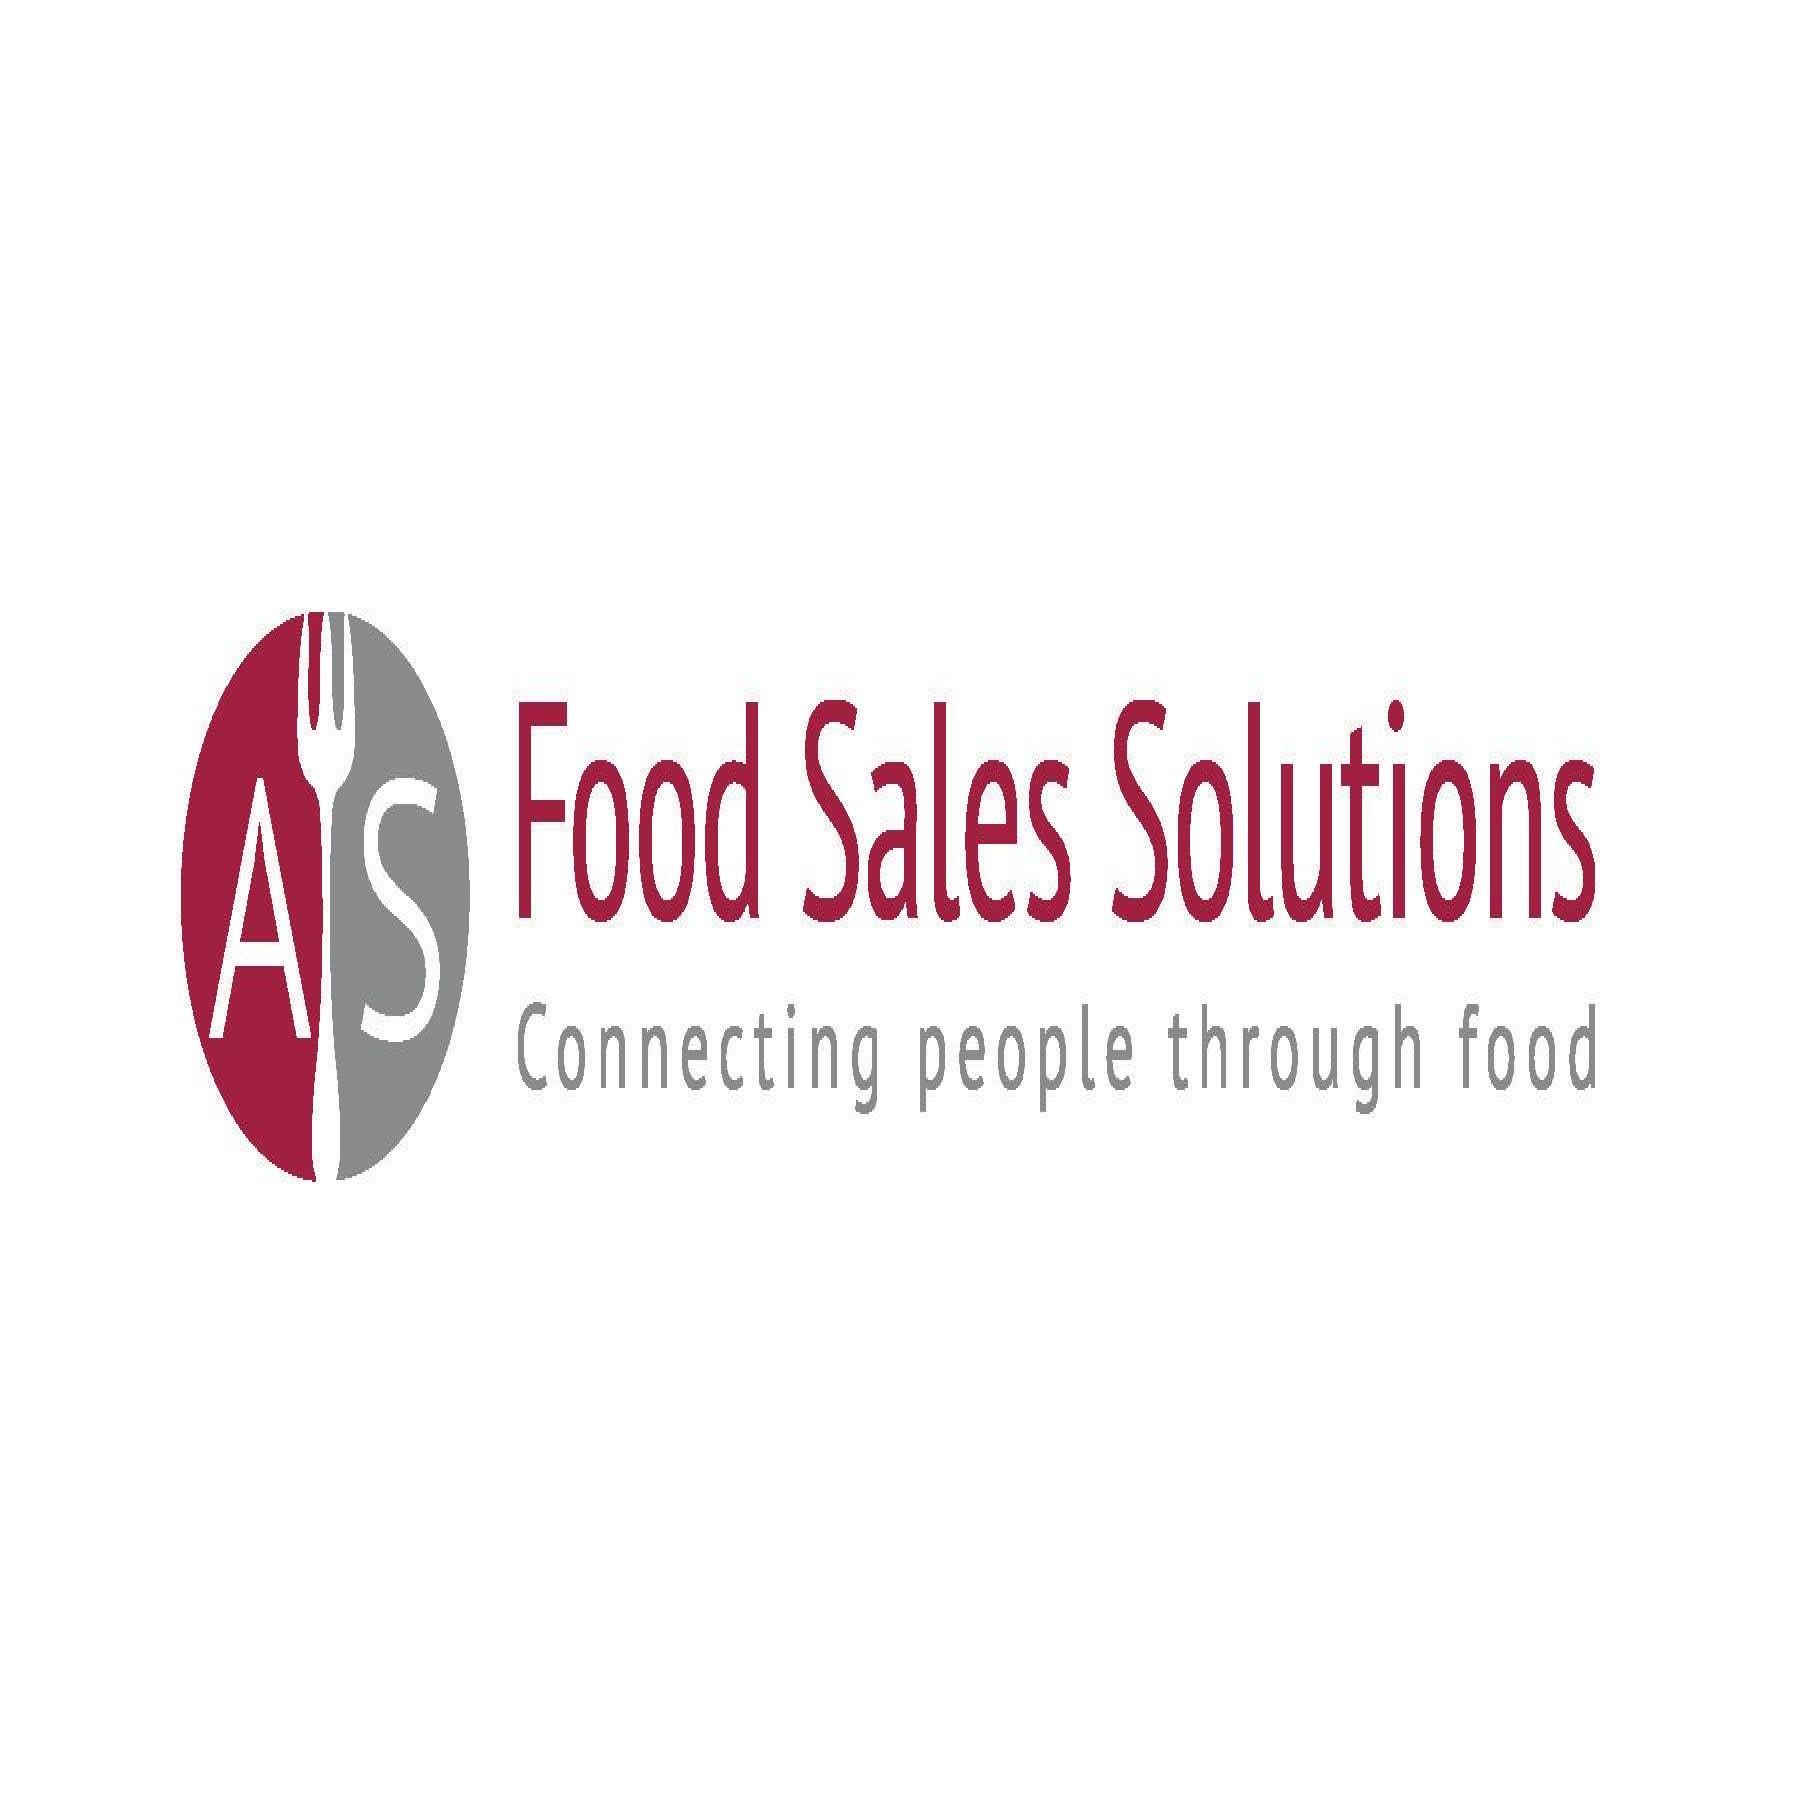 Connecting People Through Food - A.S. Food Sales